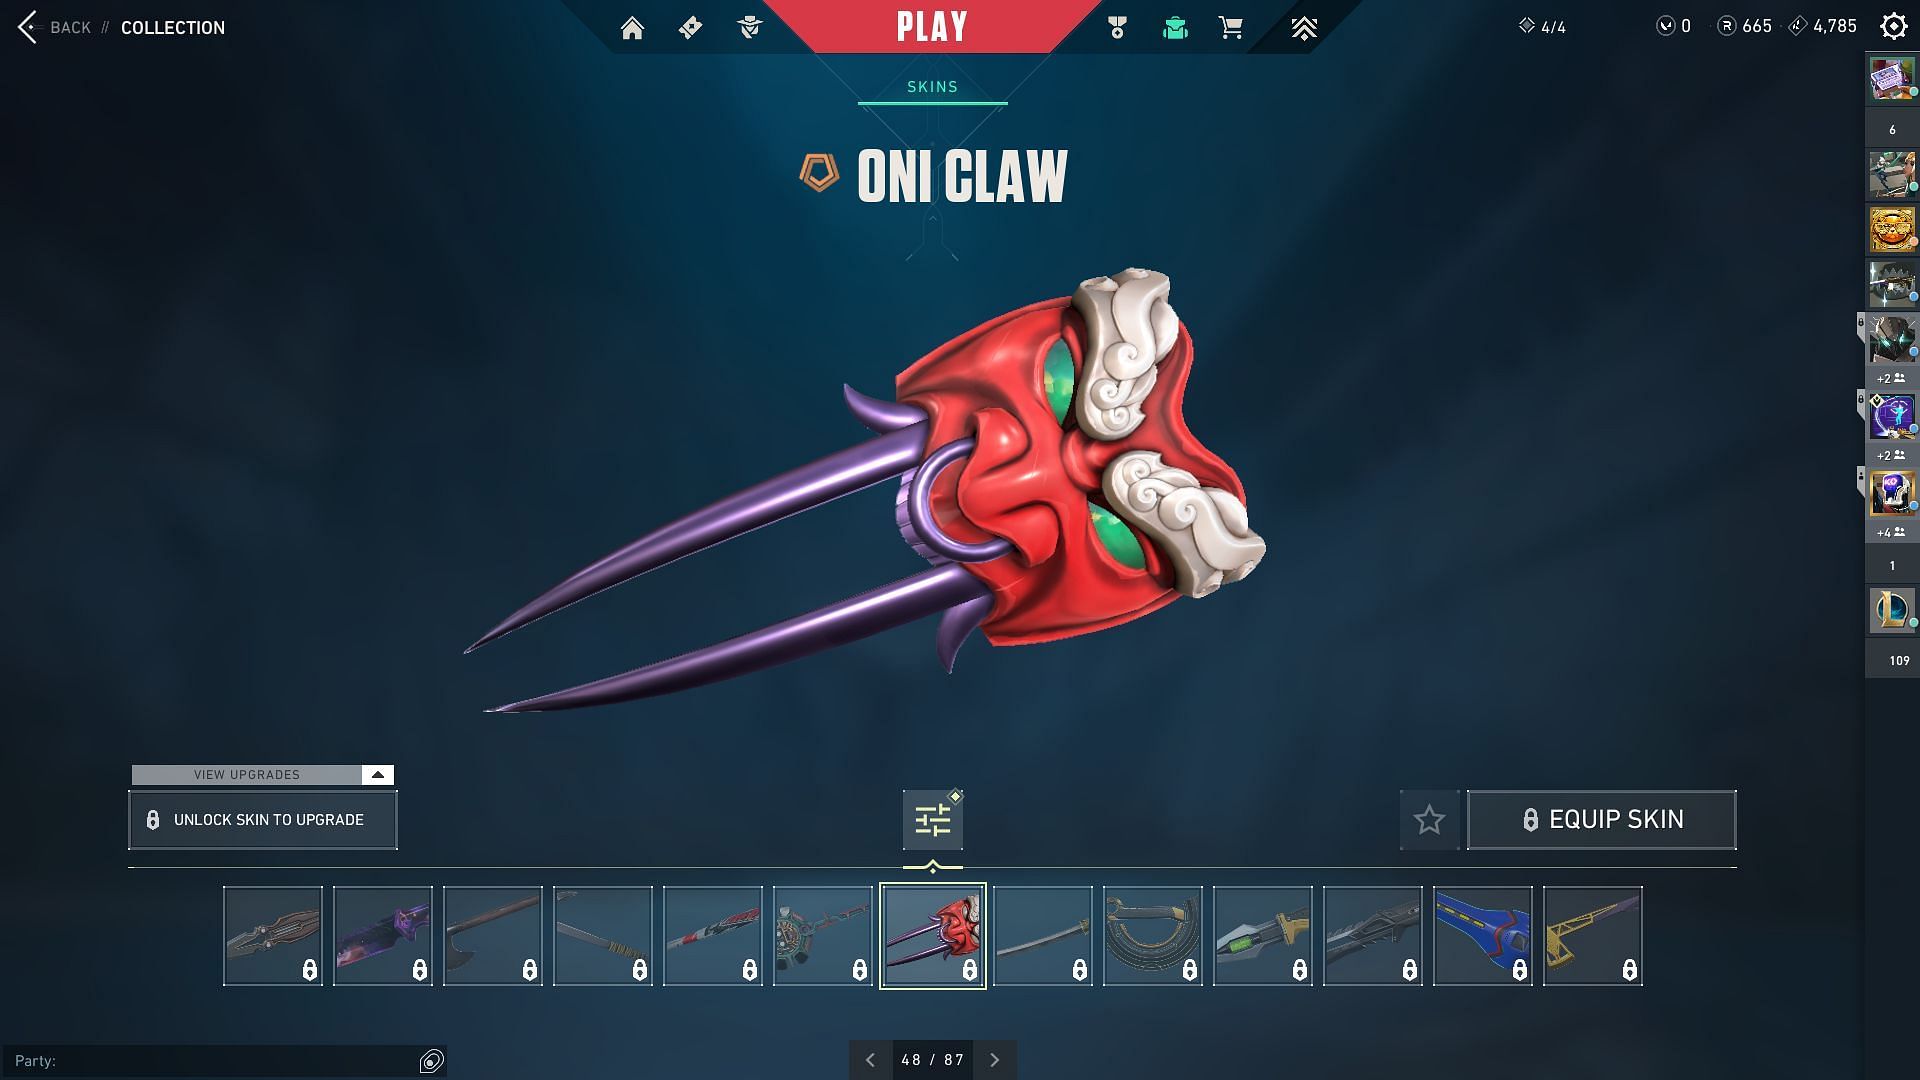 The Oni Claw (Image via Riot Games)